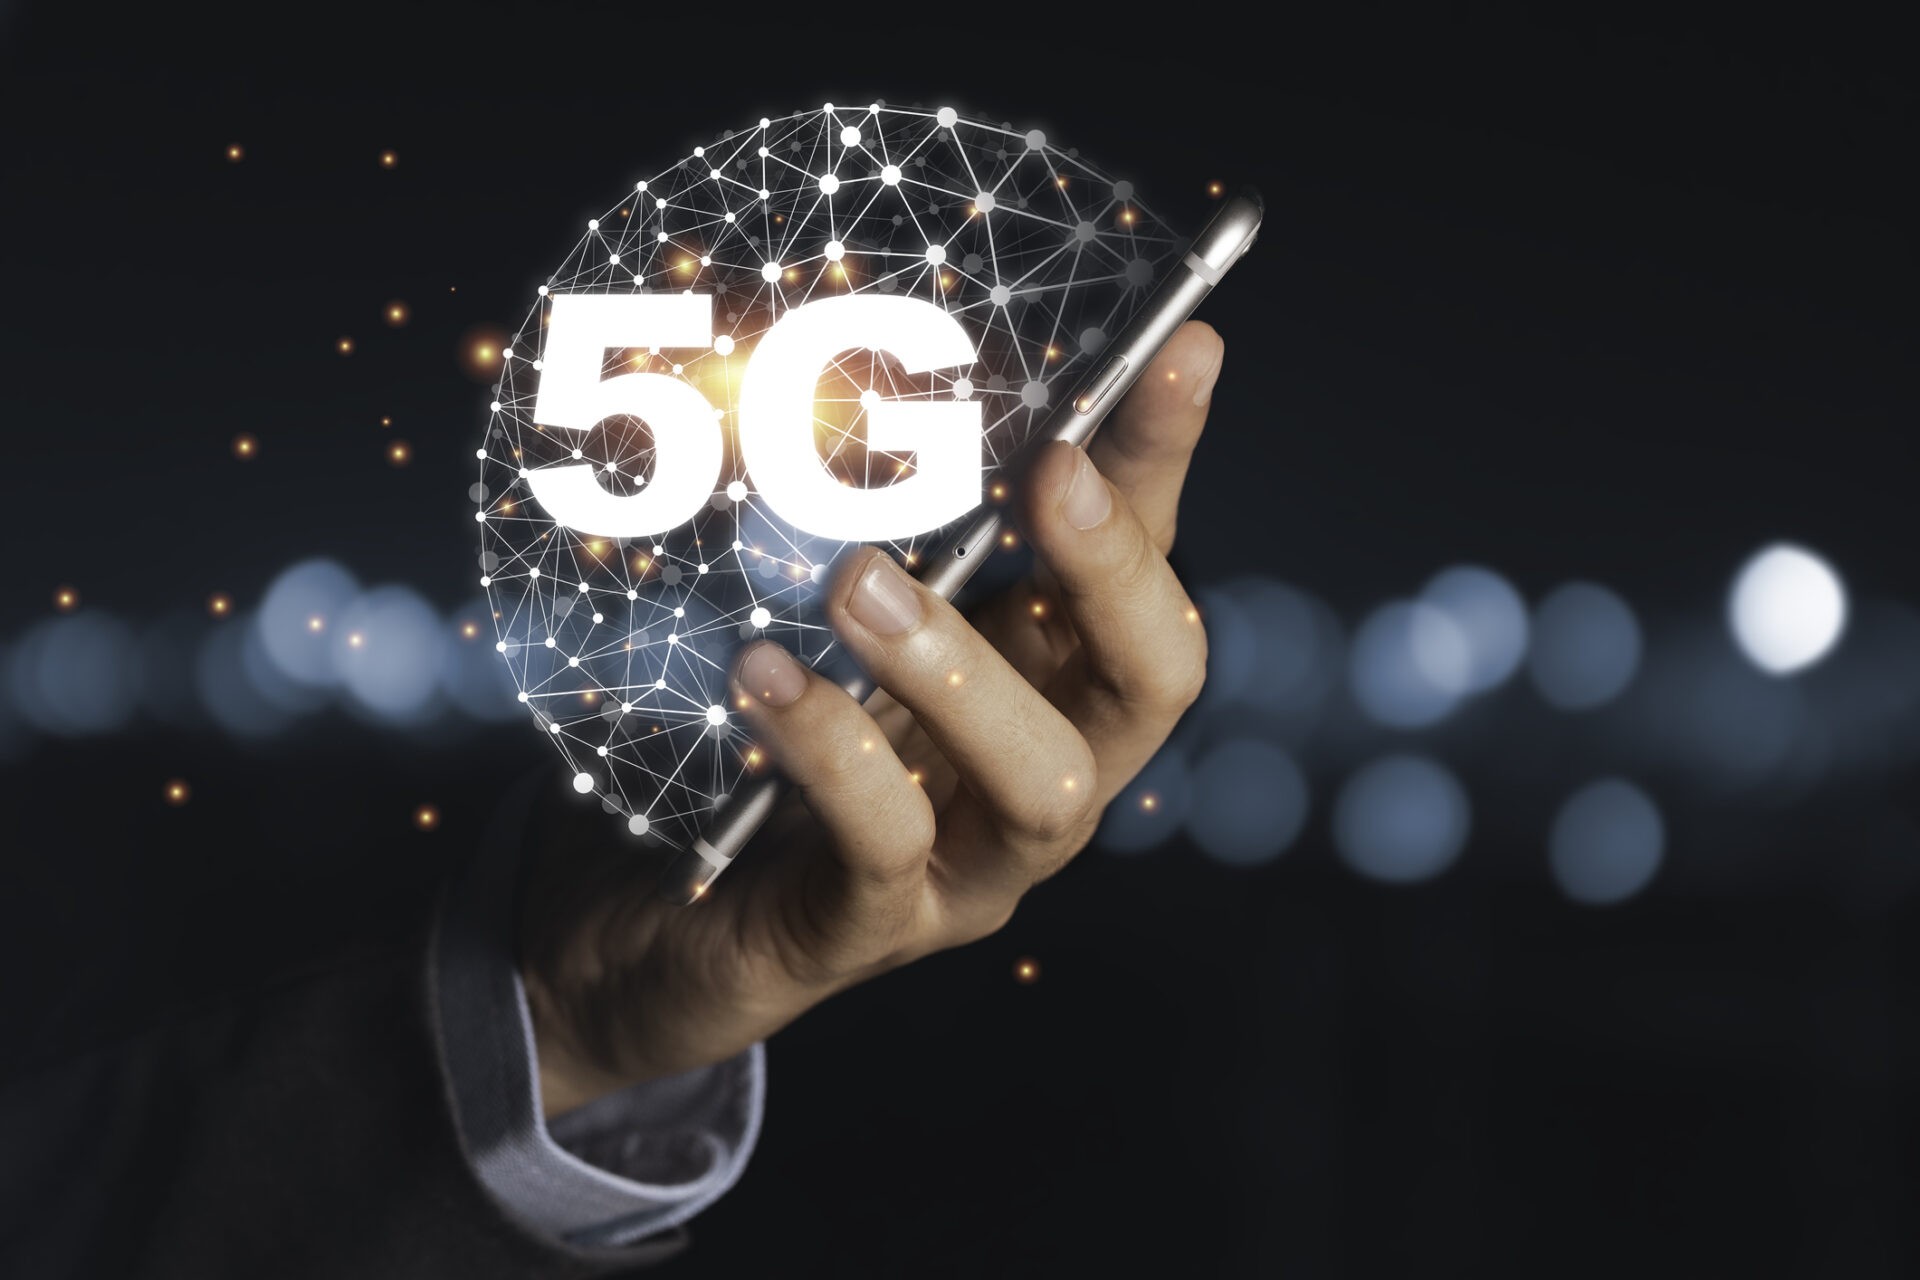 Deutsche Telekom and Partners Demonstrate Multi-Domain 5G Dynamic Slicing Orchestration for Enterprise Services